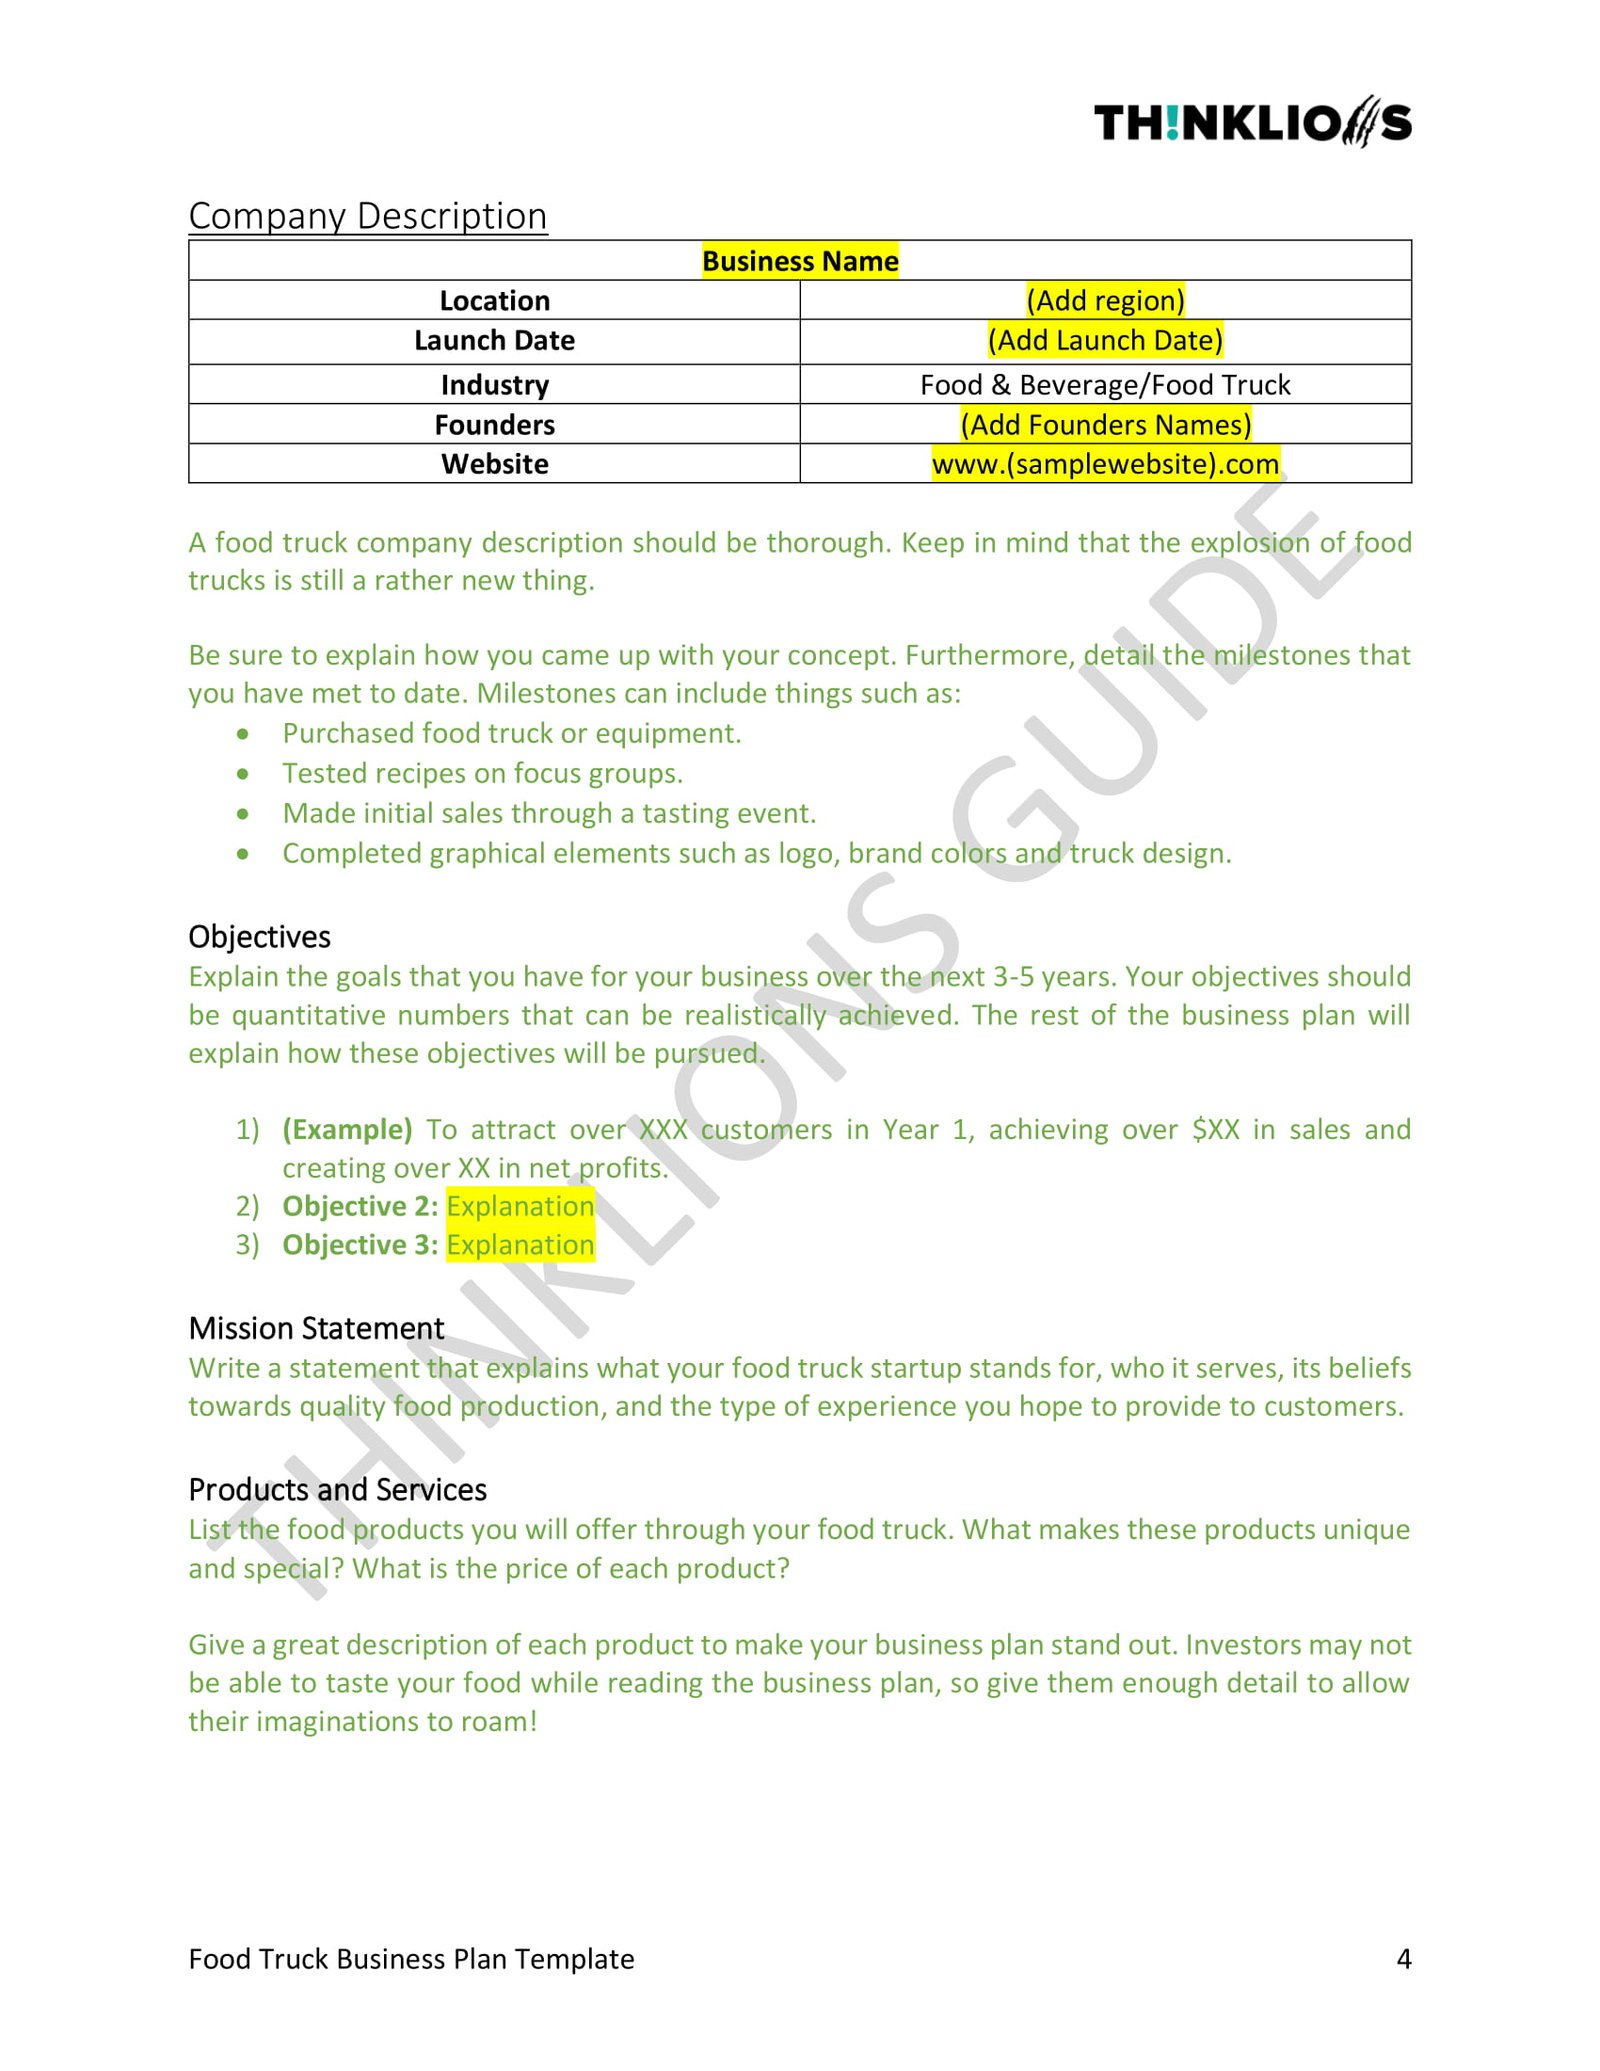 Food Truck Business Plan Template  ThinkLions With Business Plan Template Food Truck